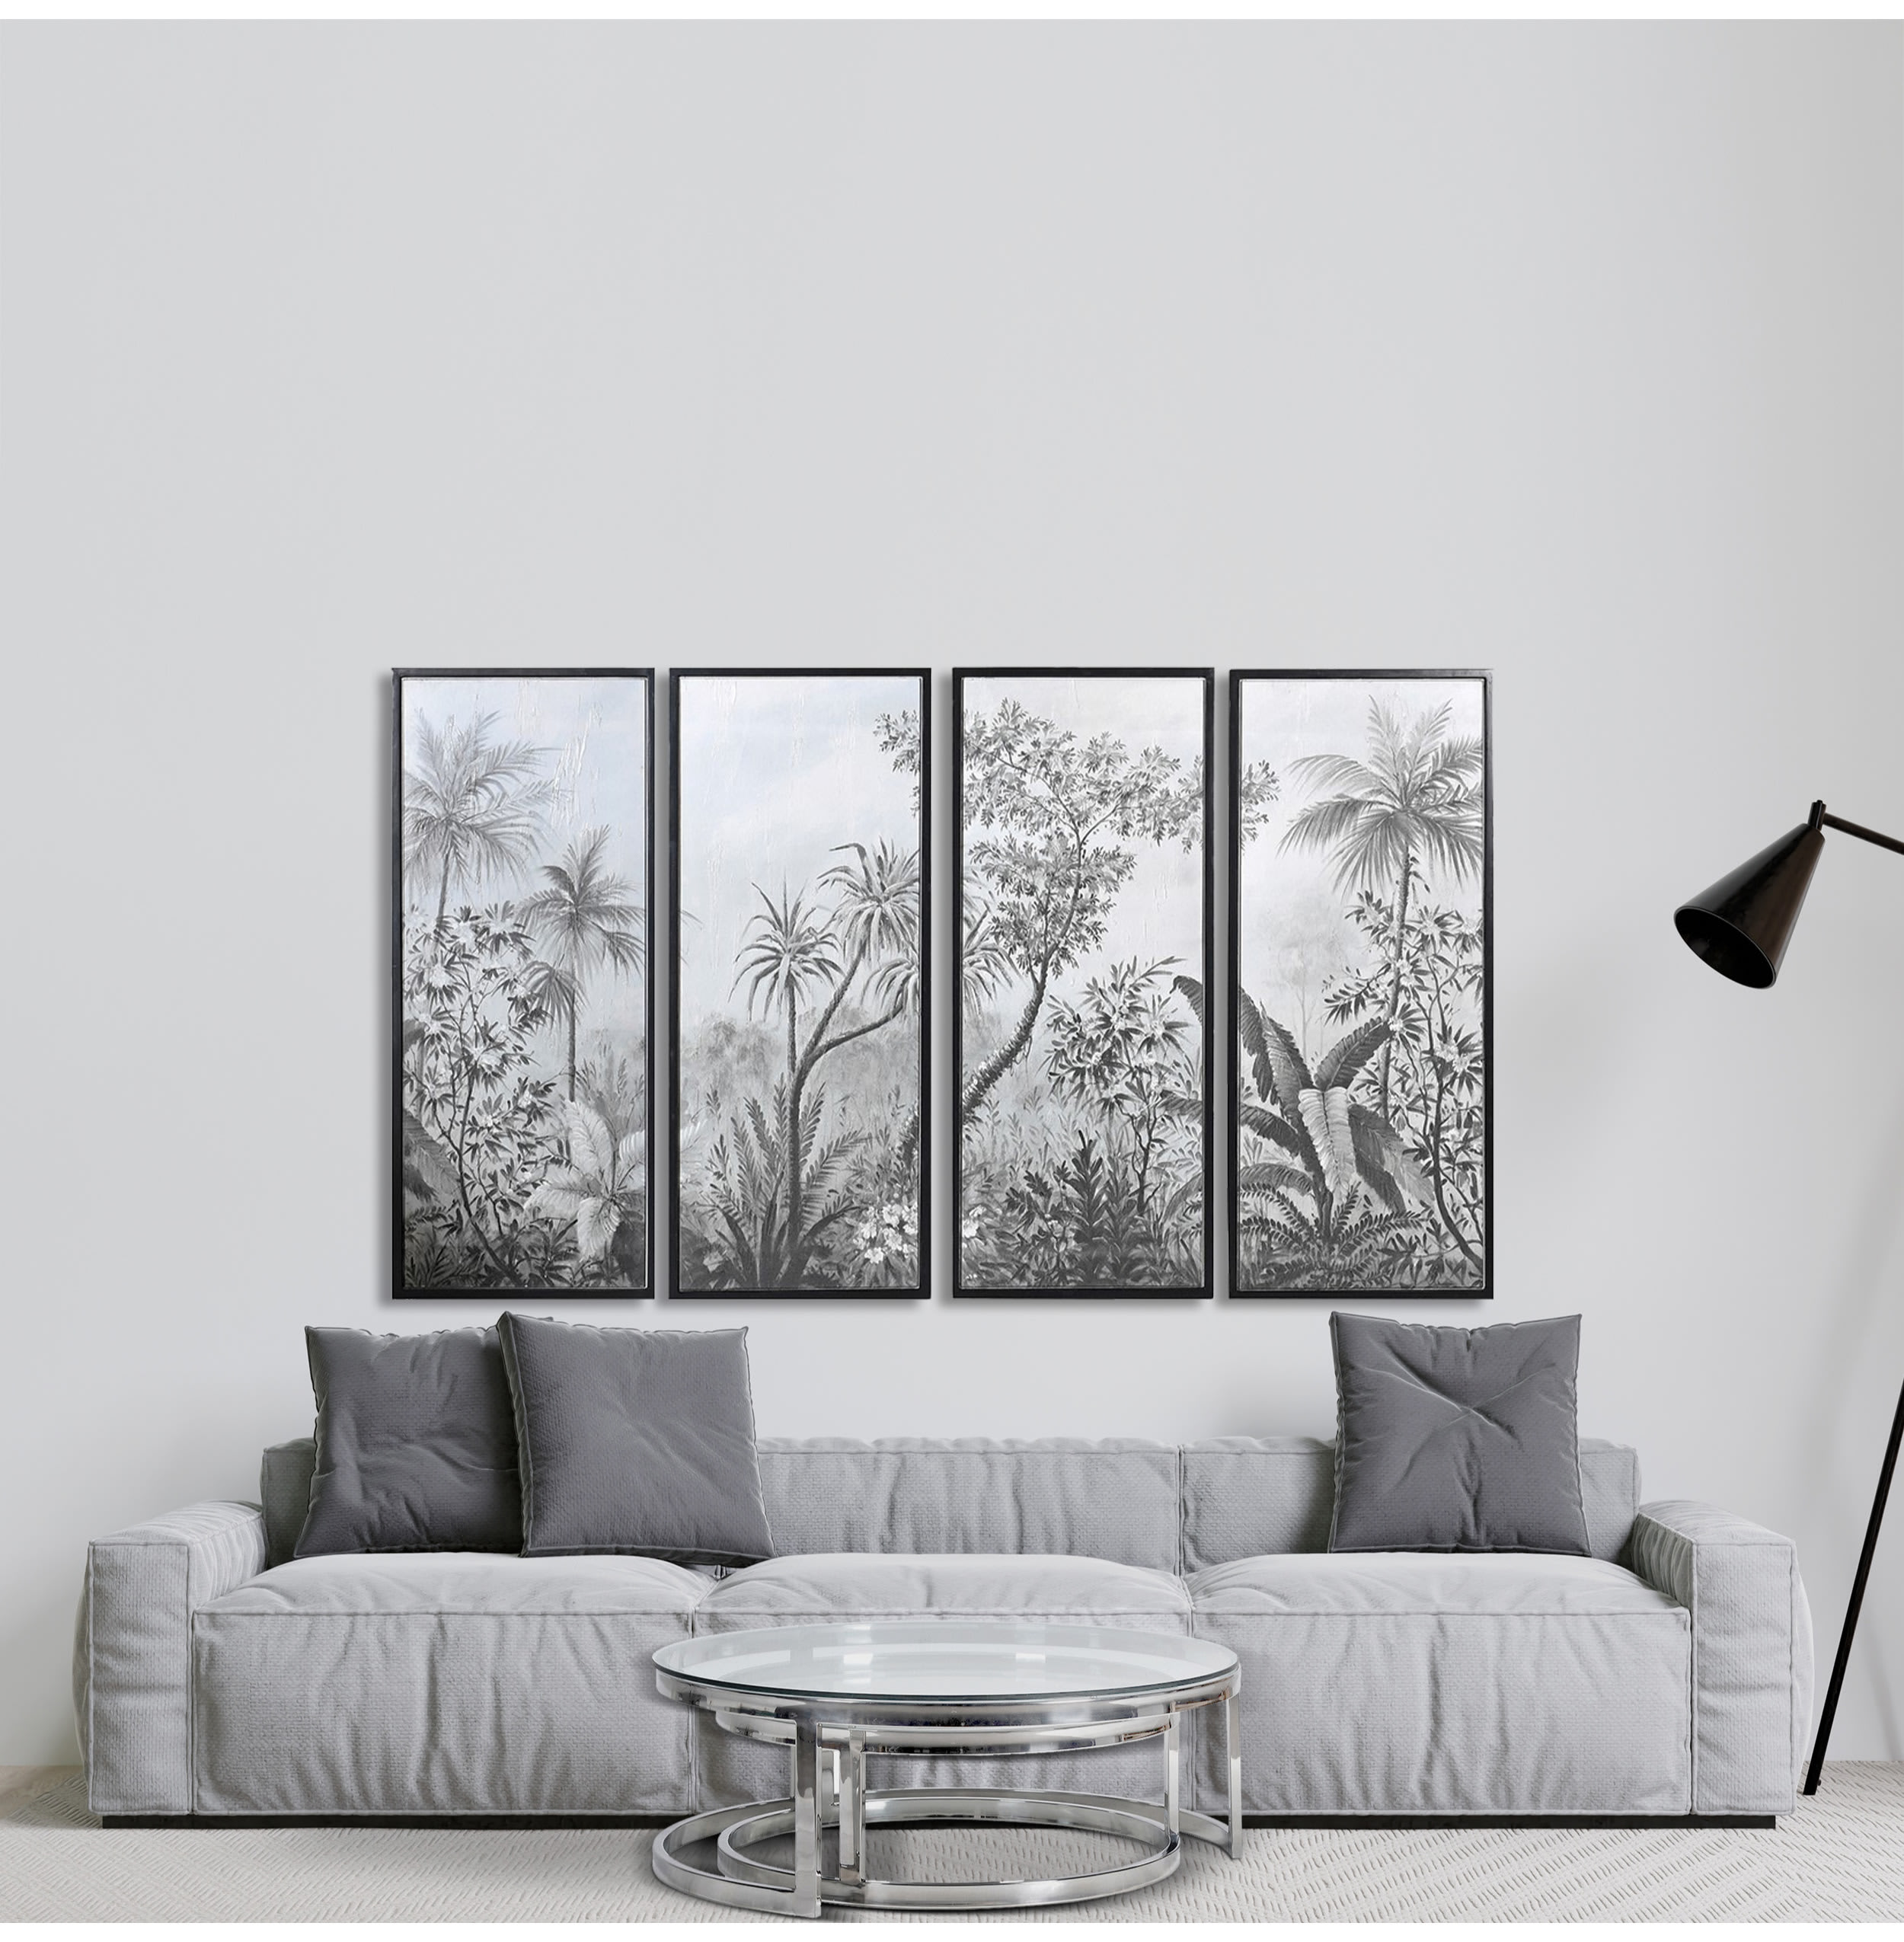 Set of 4 Monochrome Palm Tree Pictures